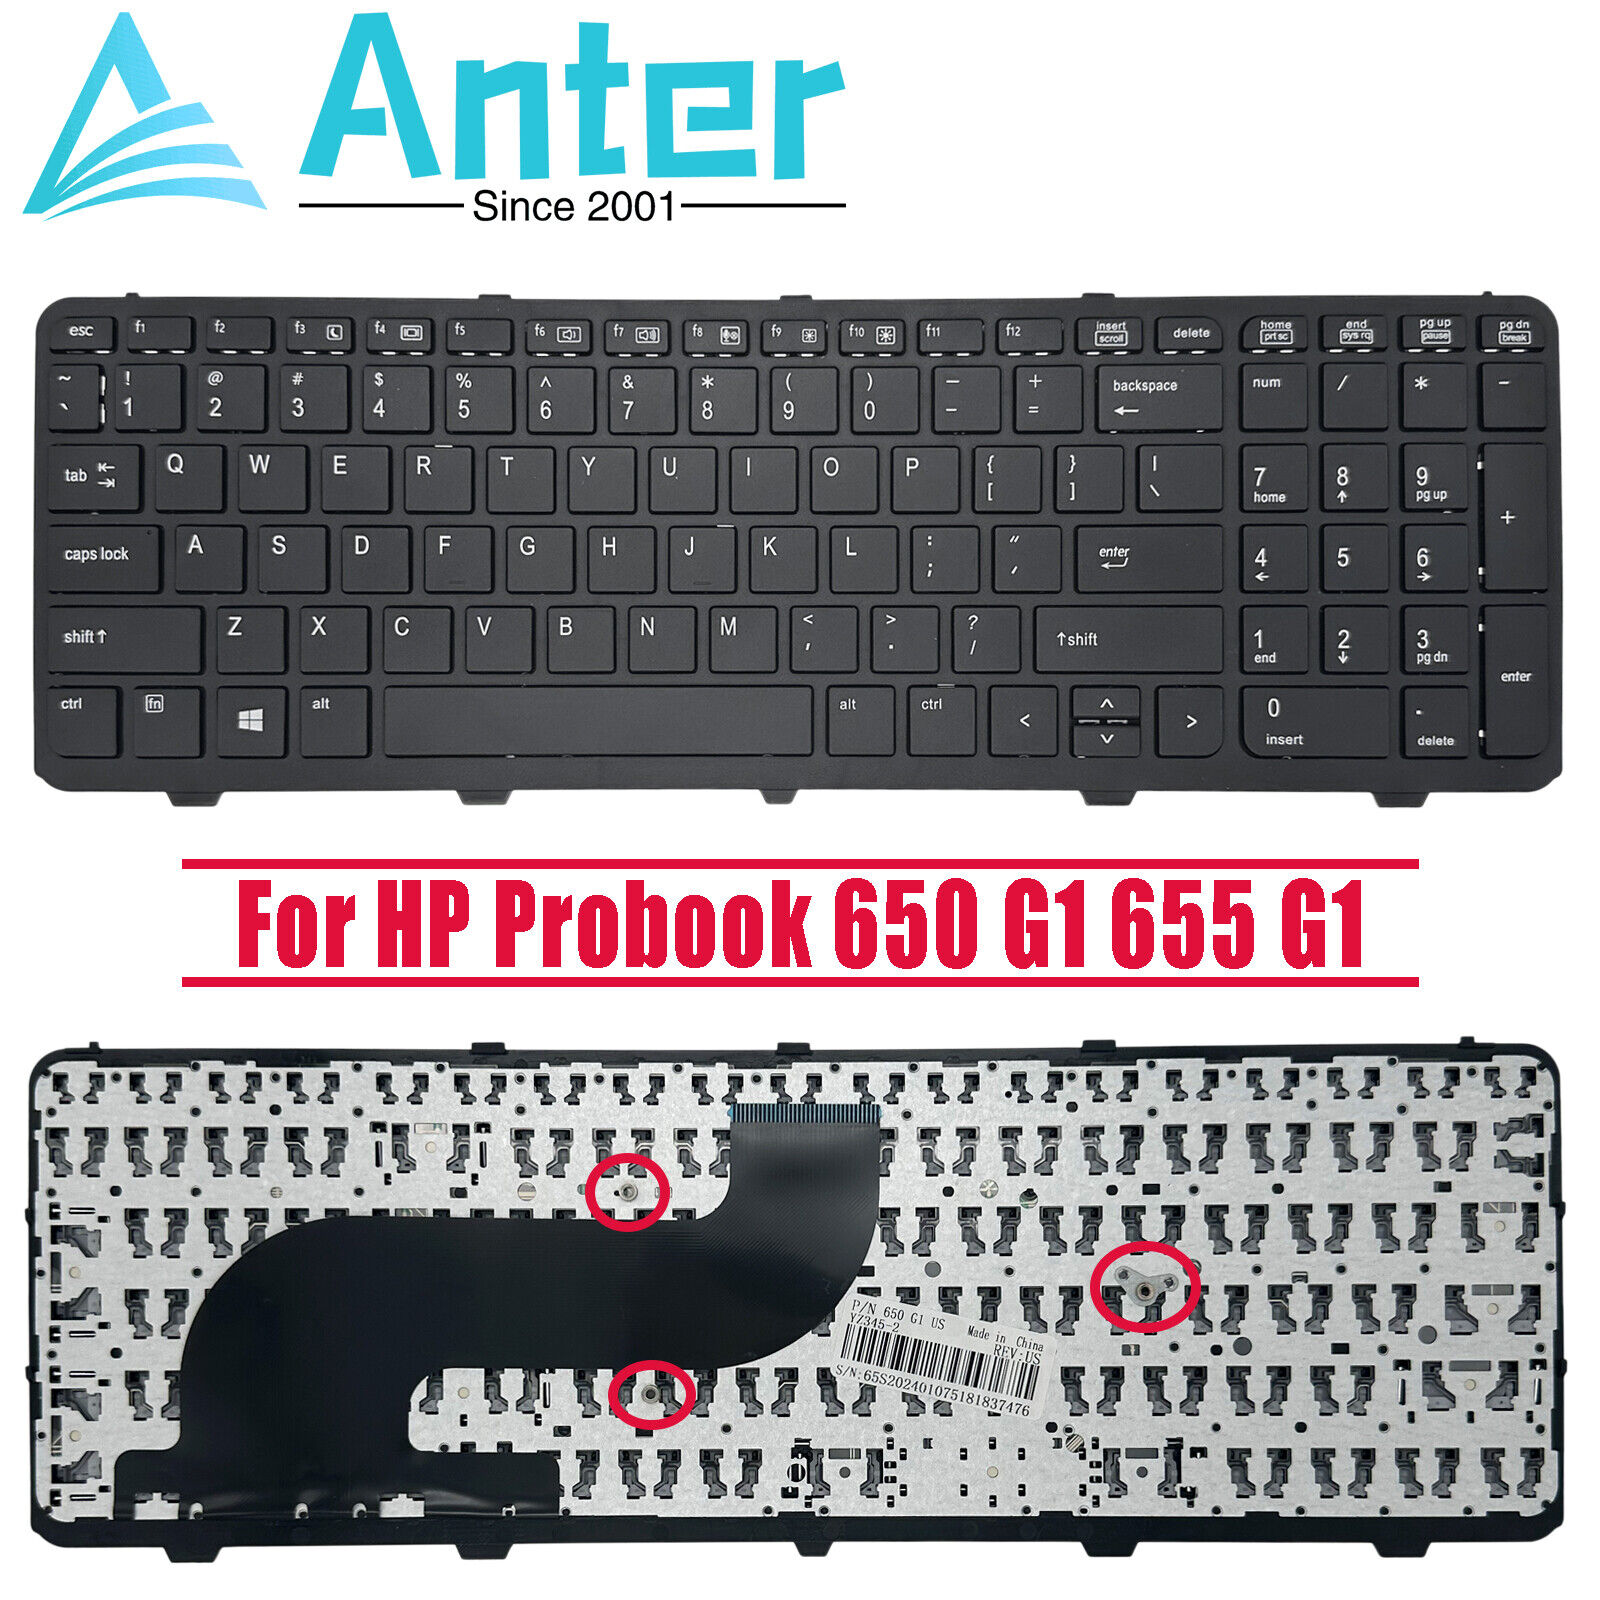 NEW Keyboard for HP Probook 650 G1 655 G1 - US English